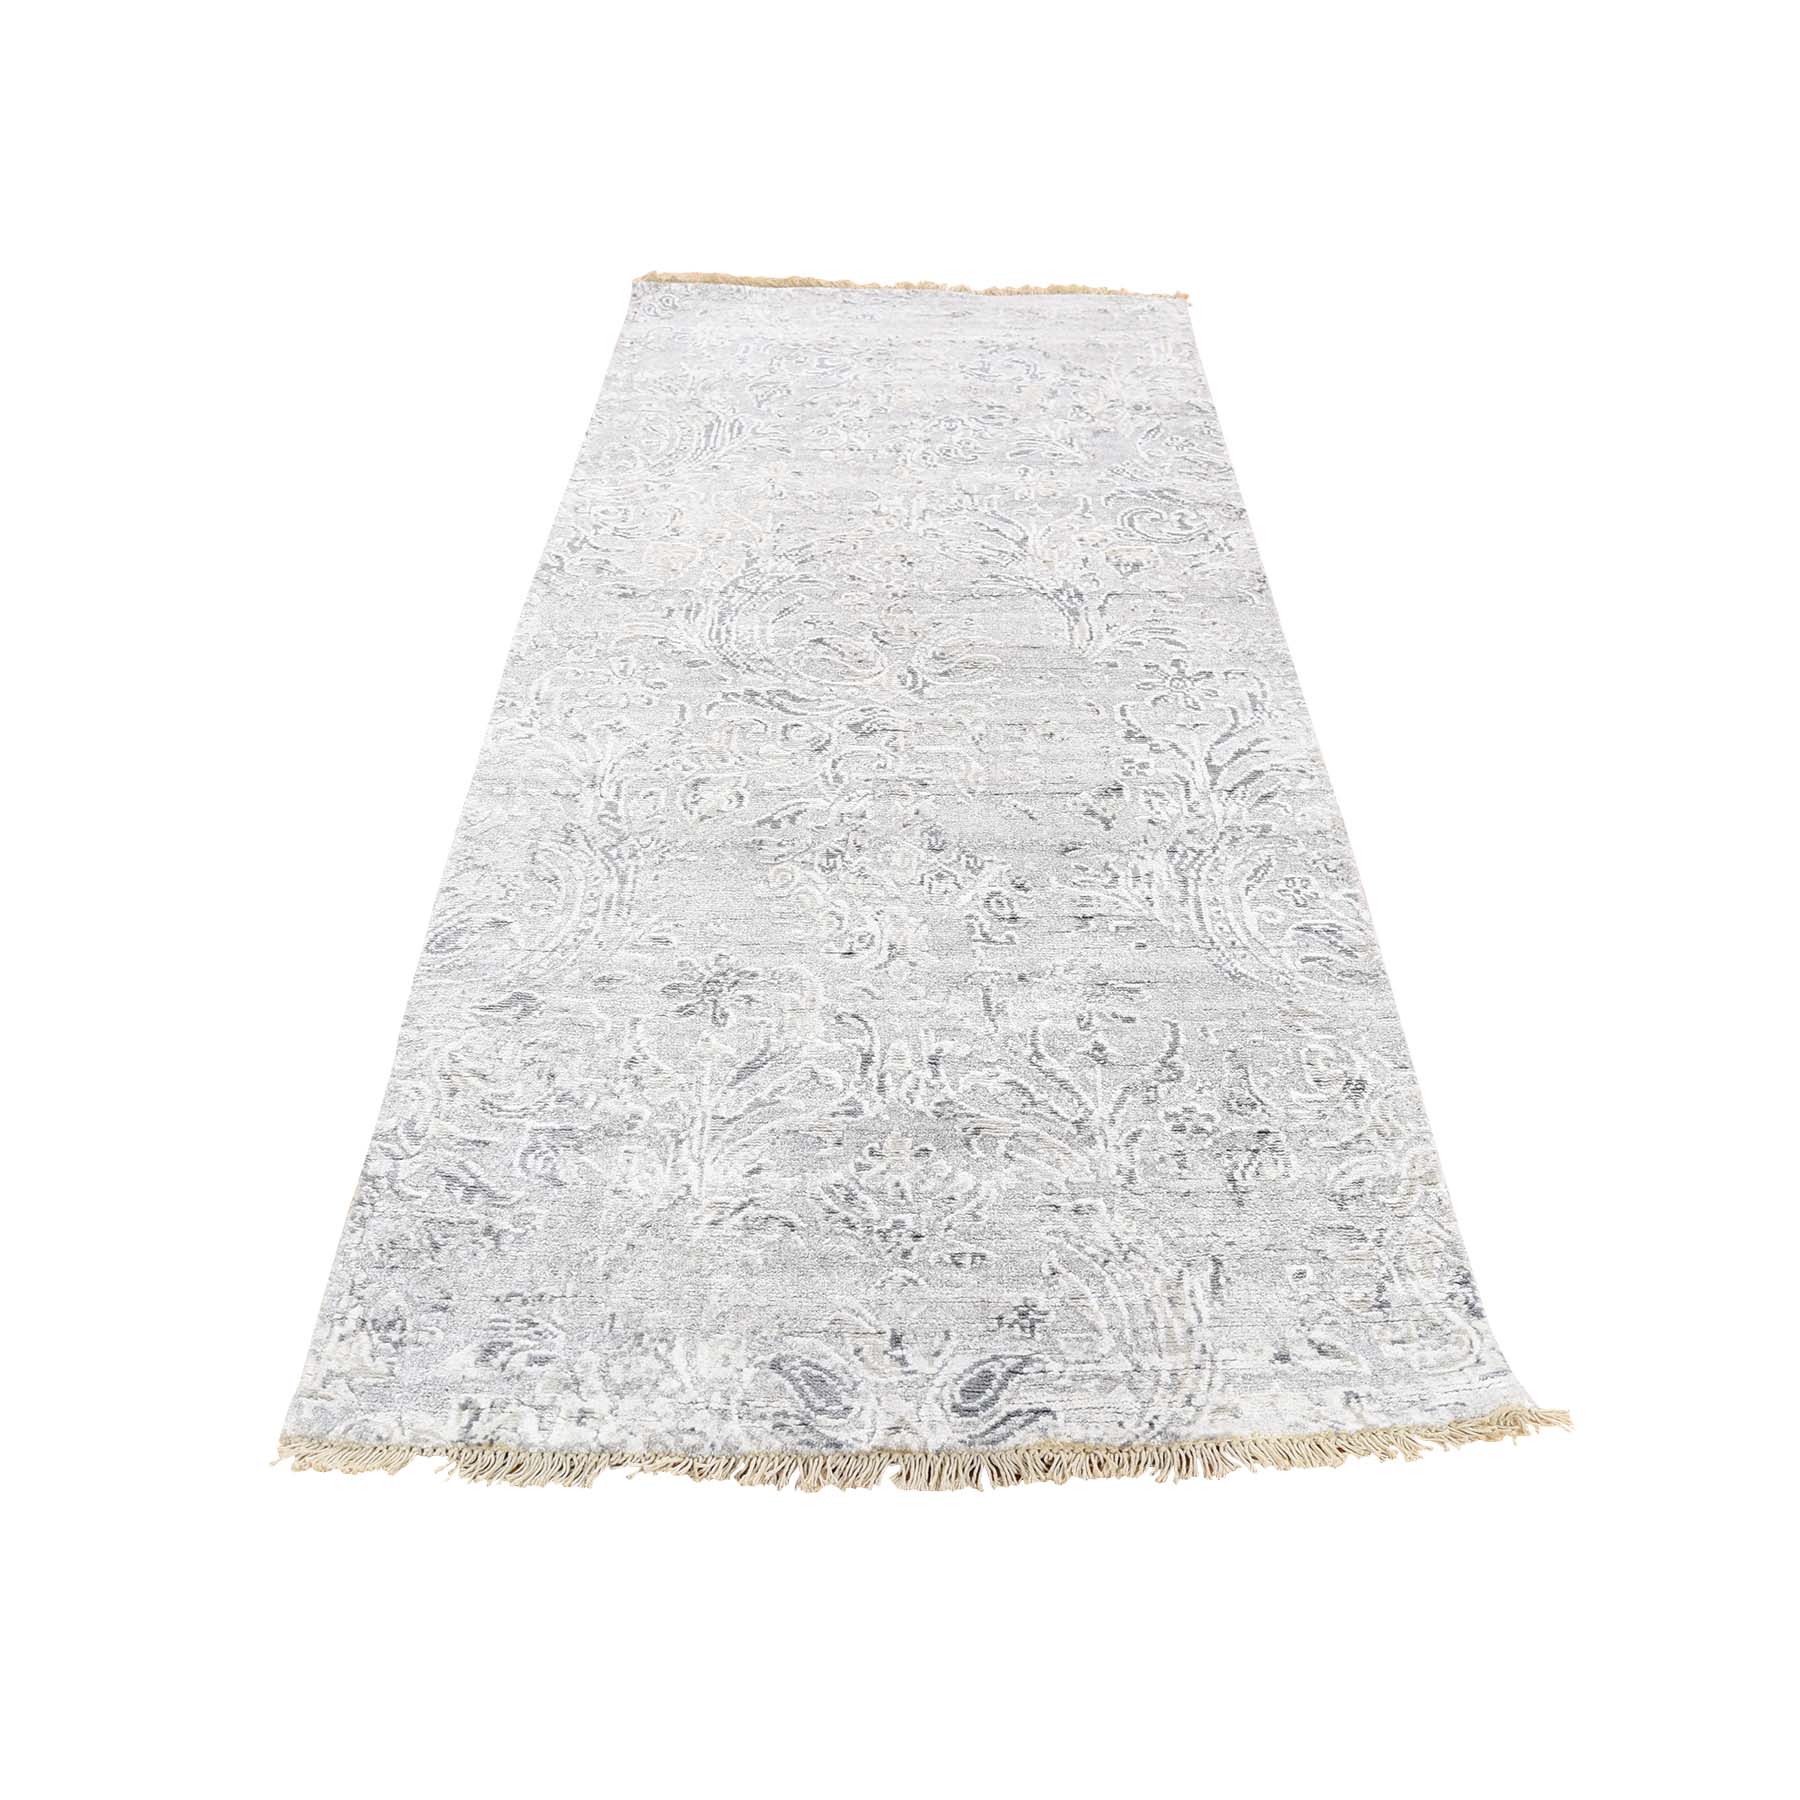 2'7"x5'10" Hand Woven Damask Tone On Tone Wool and Silk Hi-Lo Pile Runner Oriental Rug 